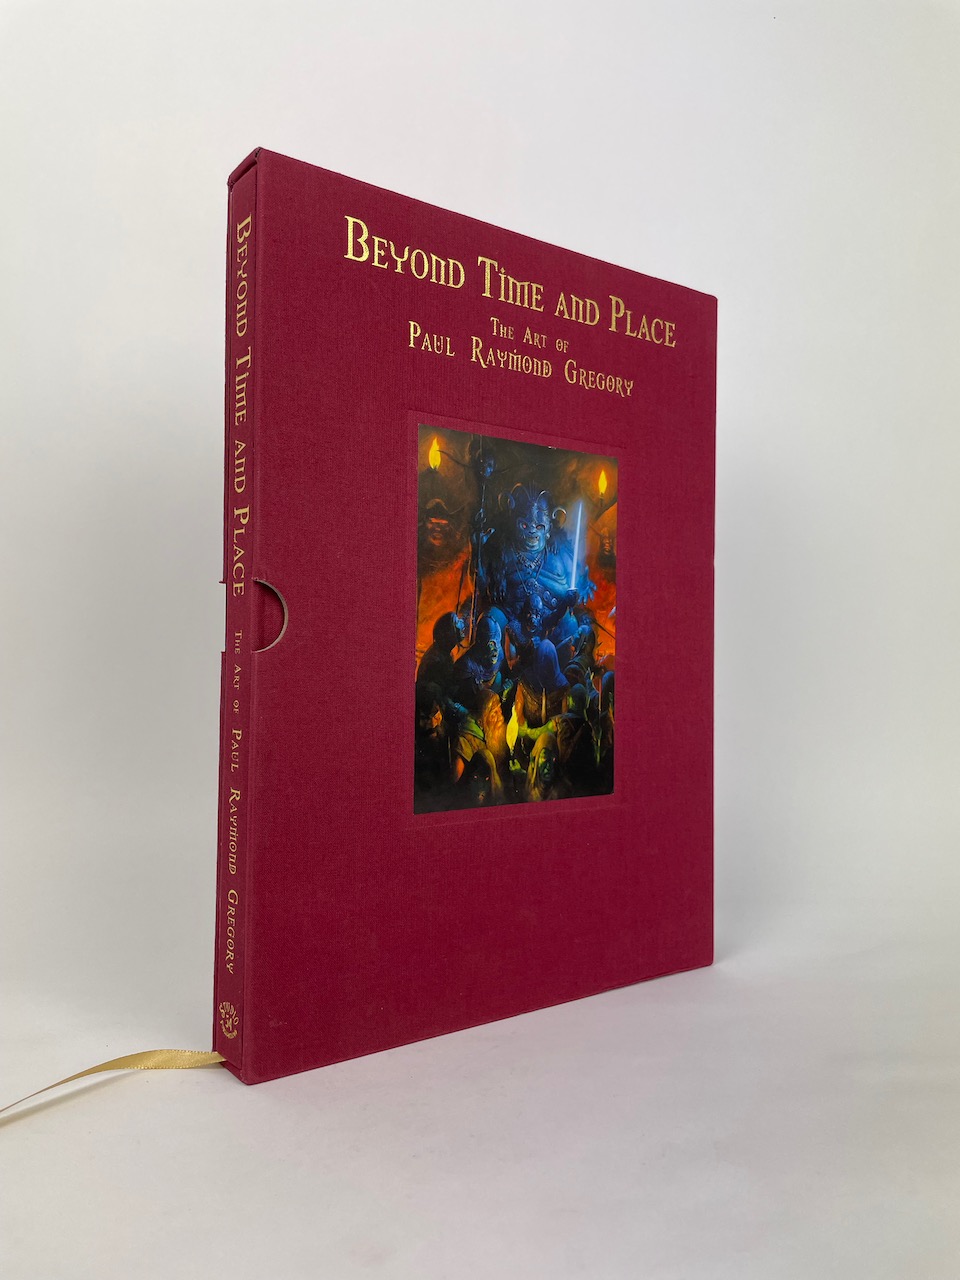 Beyond Time and Place The Art of Paul Raymond Gregory - Limited Edition Book 1